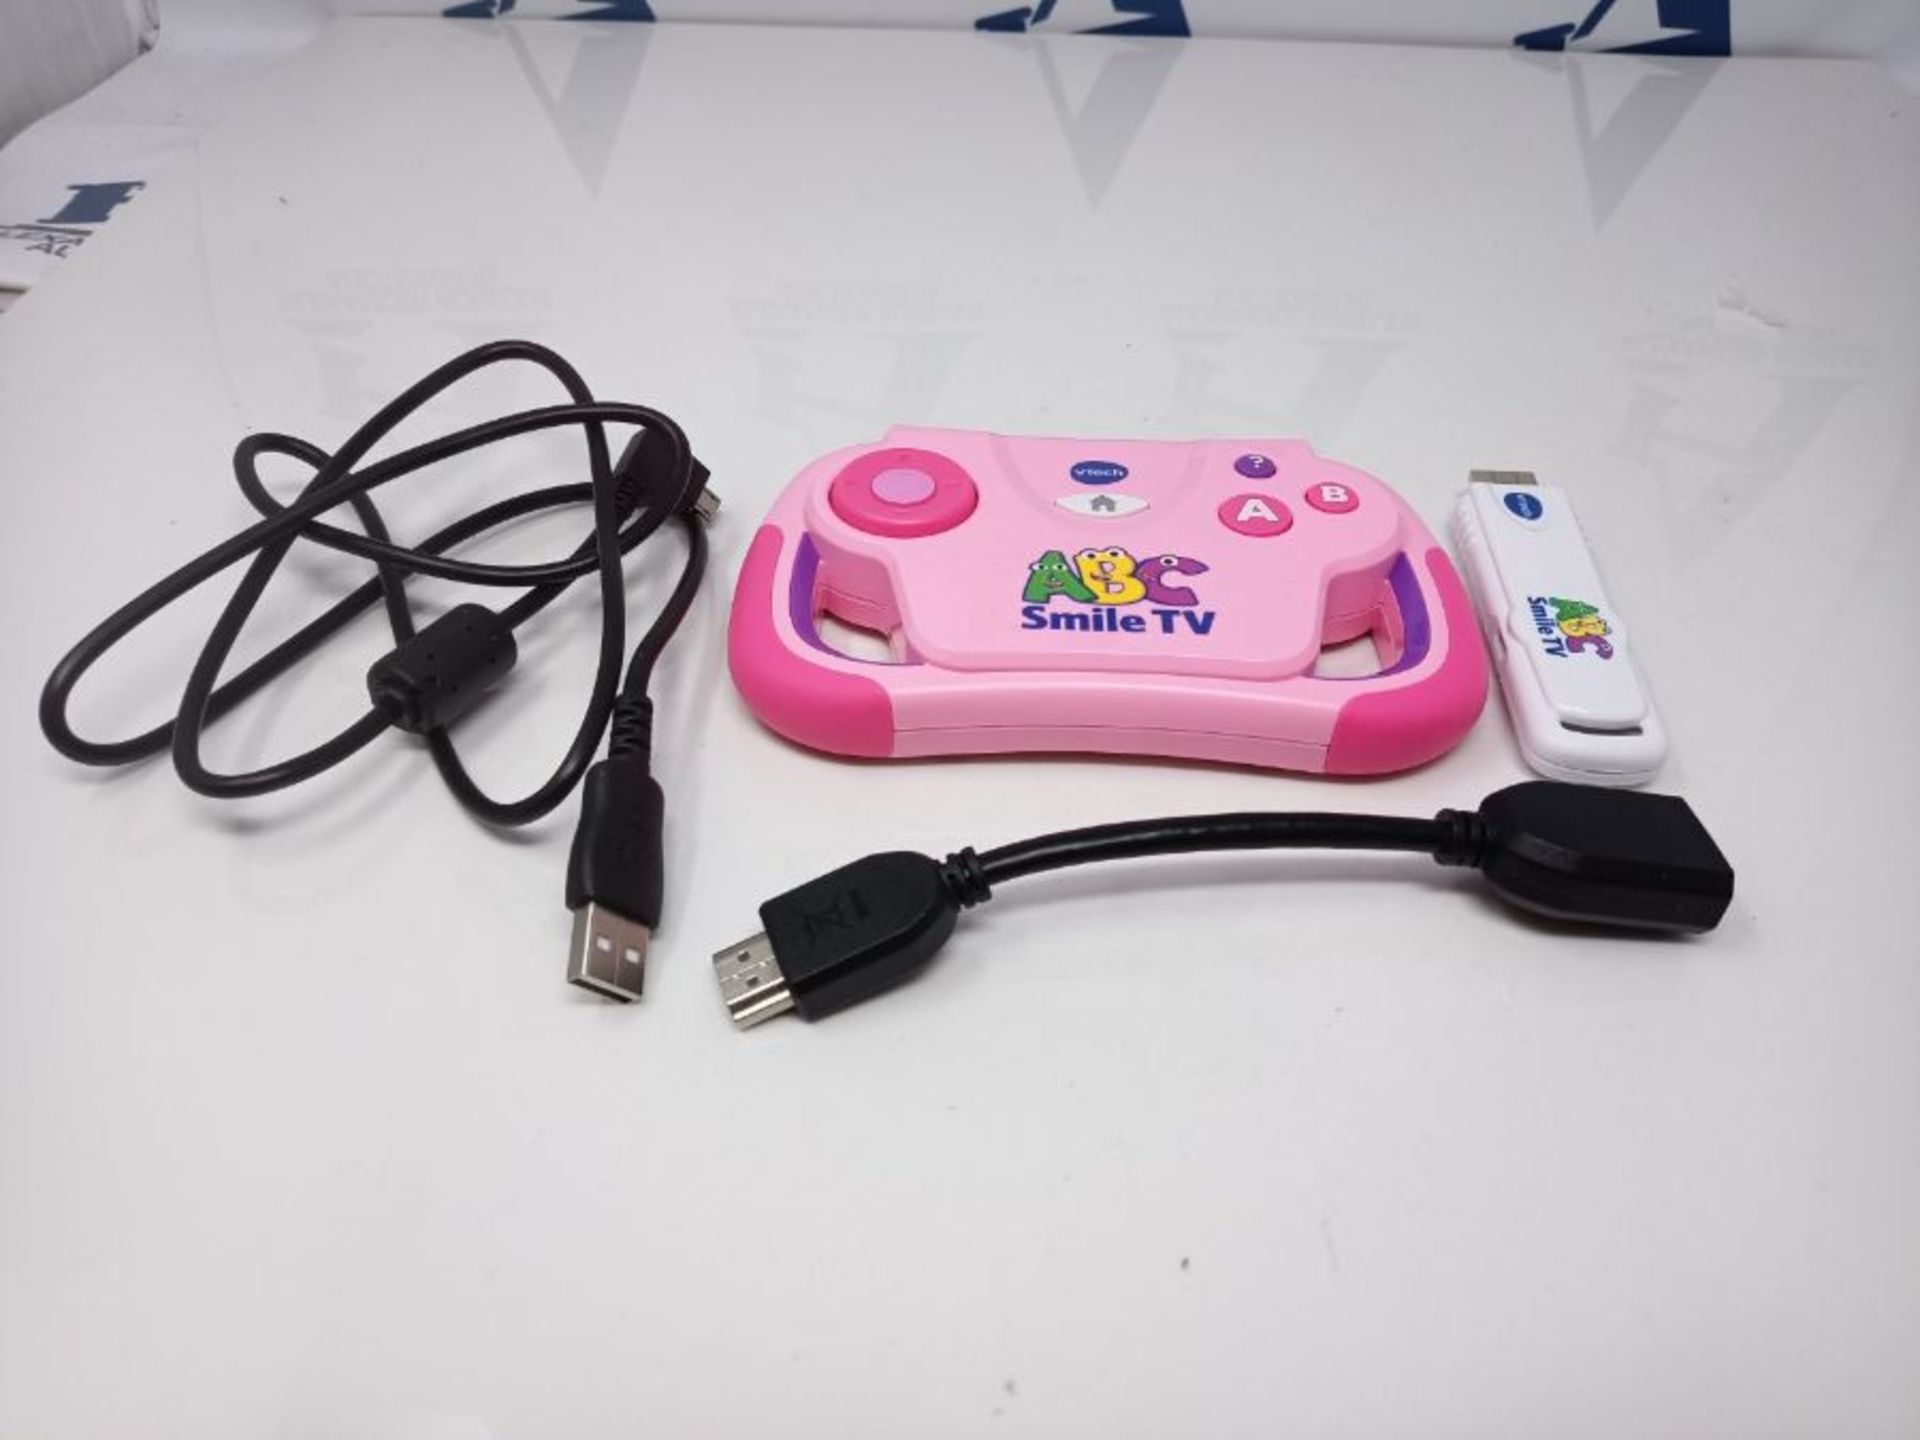 VTech 80-613254 ABC Smile TV pink Game Console - Image 3 of 3